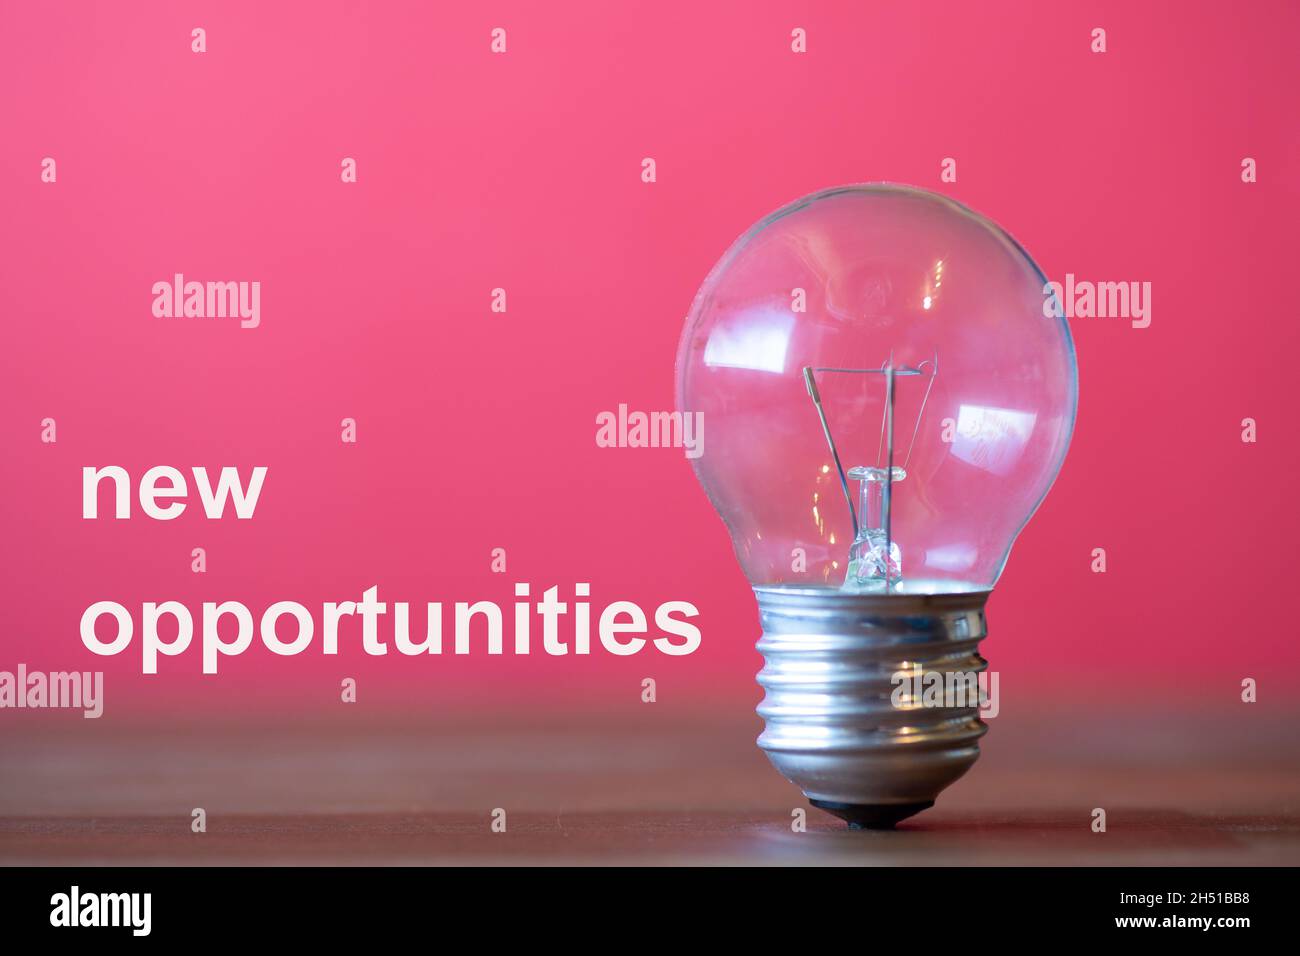 new opportunities are the words written in white on the red background  Next to the words, an ancient light bulb stands freely and upright on a dark w Stock Photo